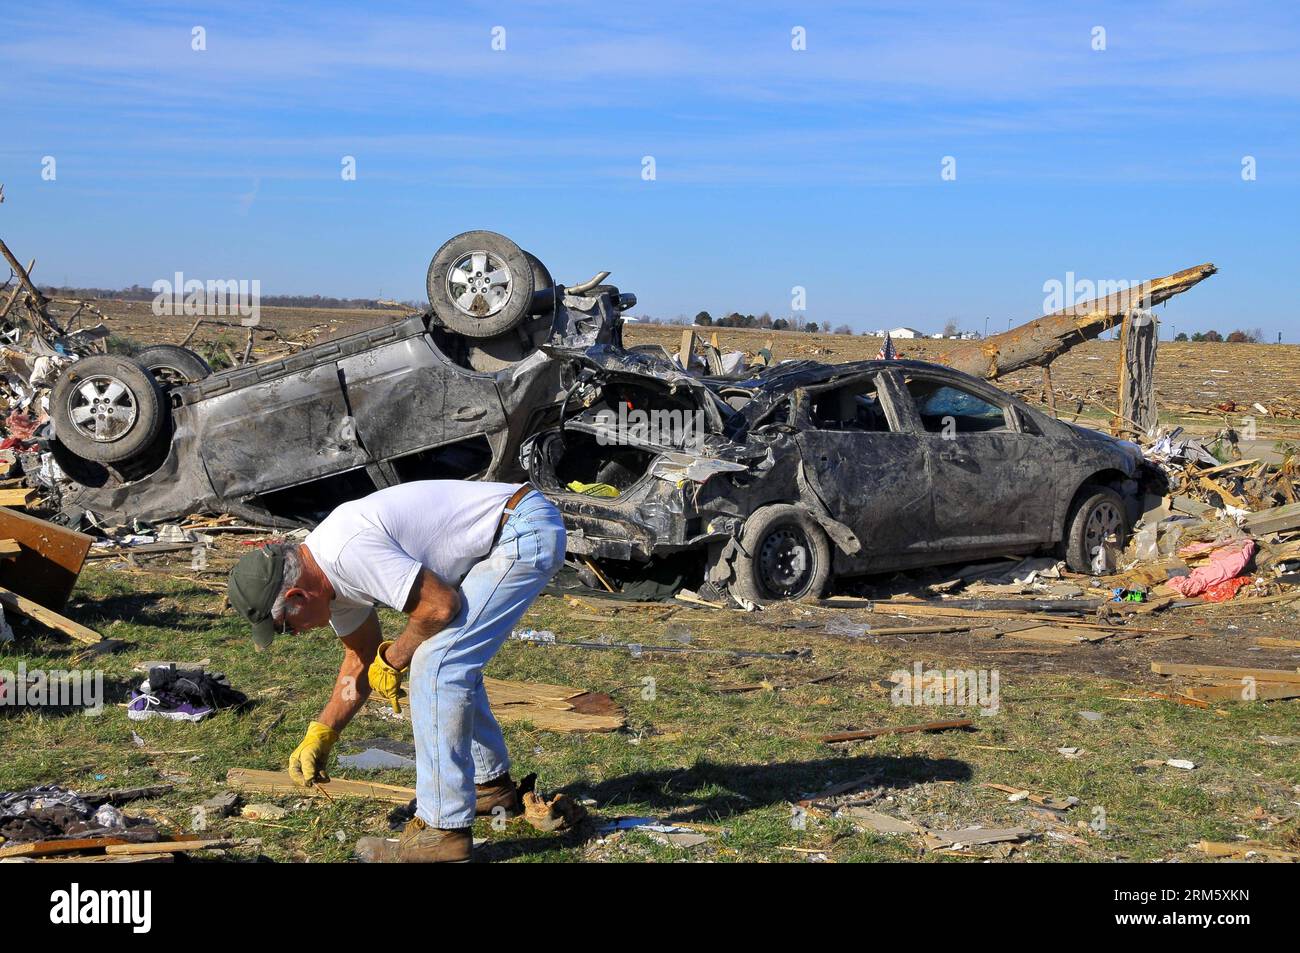 Bildnummer: 60732984  Datum: 19.11.2013  Copyright: imago/Xinhua ILLINOIS, Nov. 19, 2013 (Xinhua) -- A local resident works in ruins after a tornado attack in the town of Washington in Illinois, the United States, on Nov. 19, 2013. At least 16 were killed during tornado attacks on Sunday, according to the National Weather Service. (Xinhua/Zhang Baoping)(ybg) US-ILLINOIS-TORNADO PUBLICATIONxNOTxINxCHN Gesellschaft USA Naturkatastrophe x0x xsk 2013 quer Aufmacher premiumd     60732984 Date 19 11 2013 Copyright Imago XINHUA Illinois Nov 19 2013 XINHUA a Local Resident Works in Ruins After a Torna Stock Photo